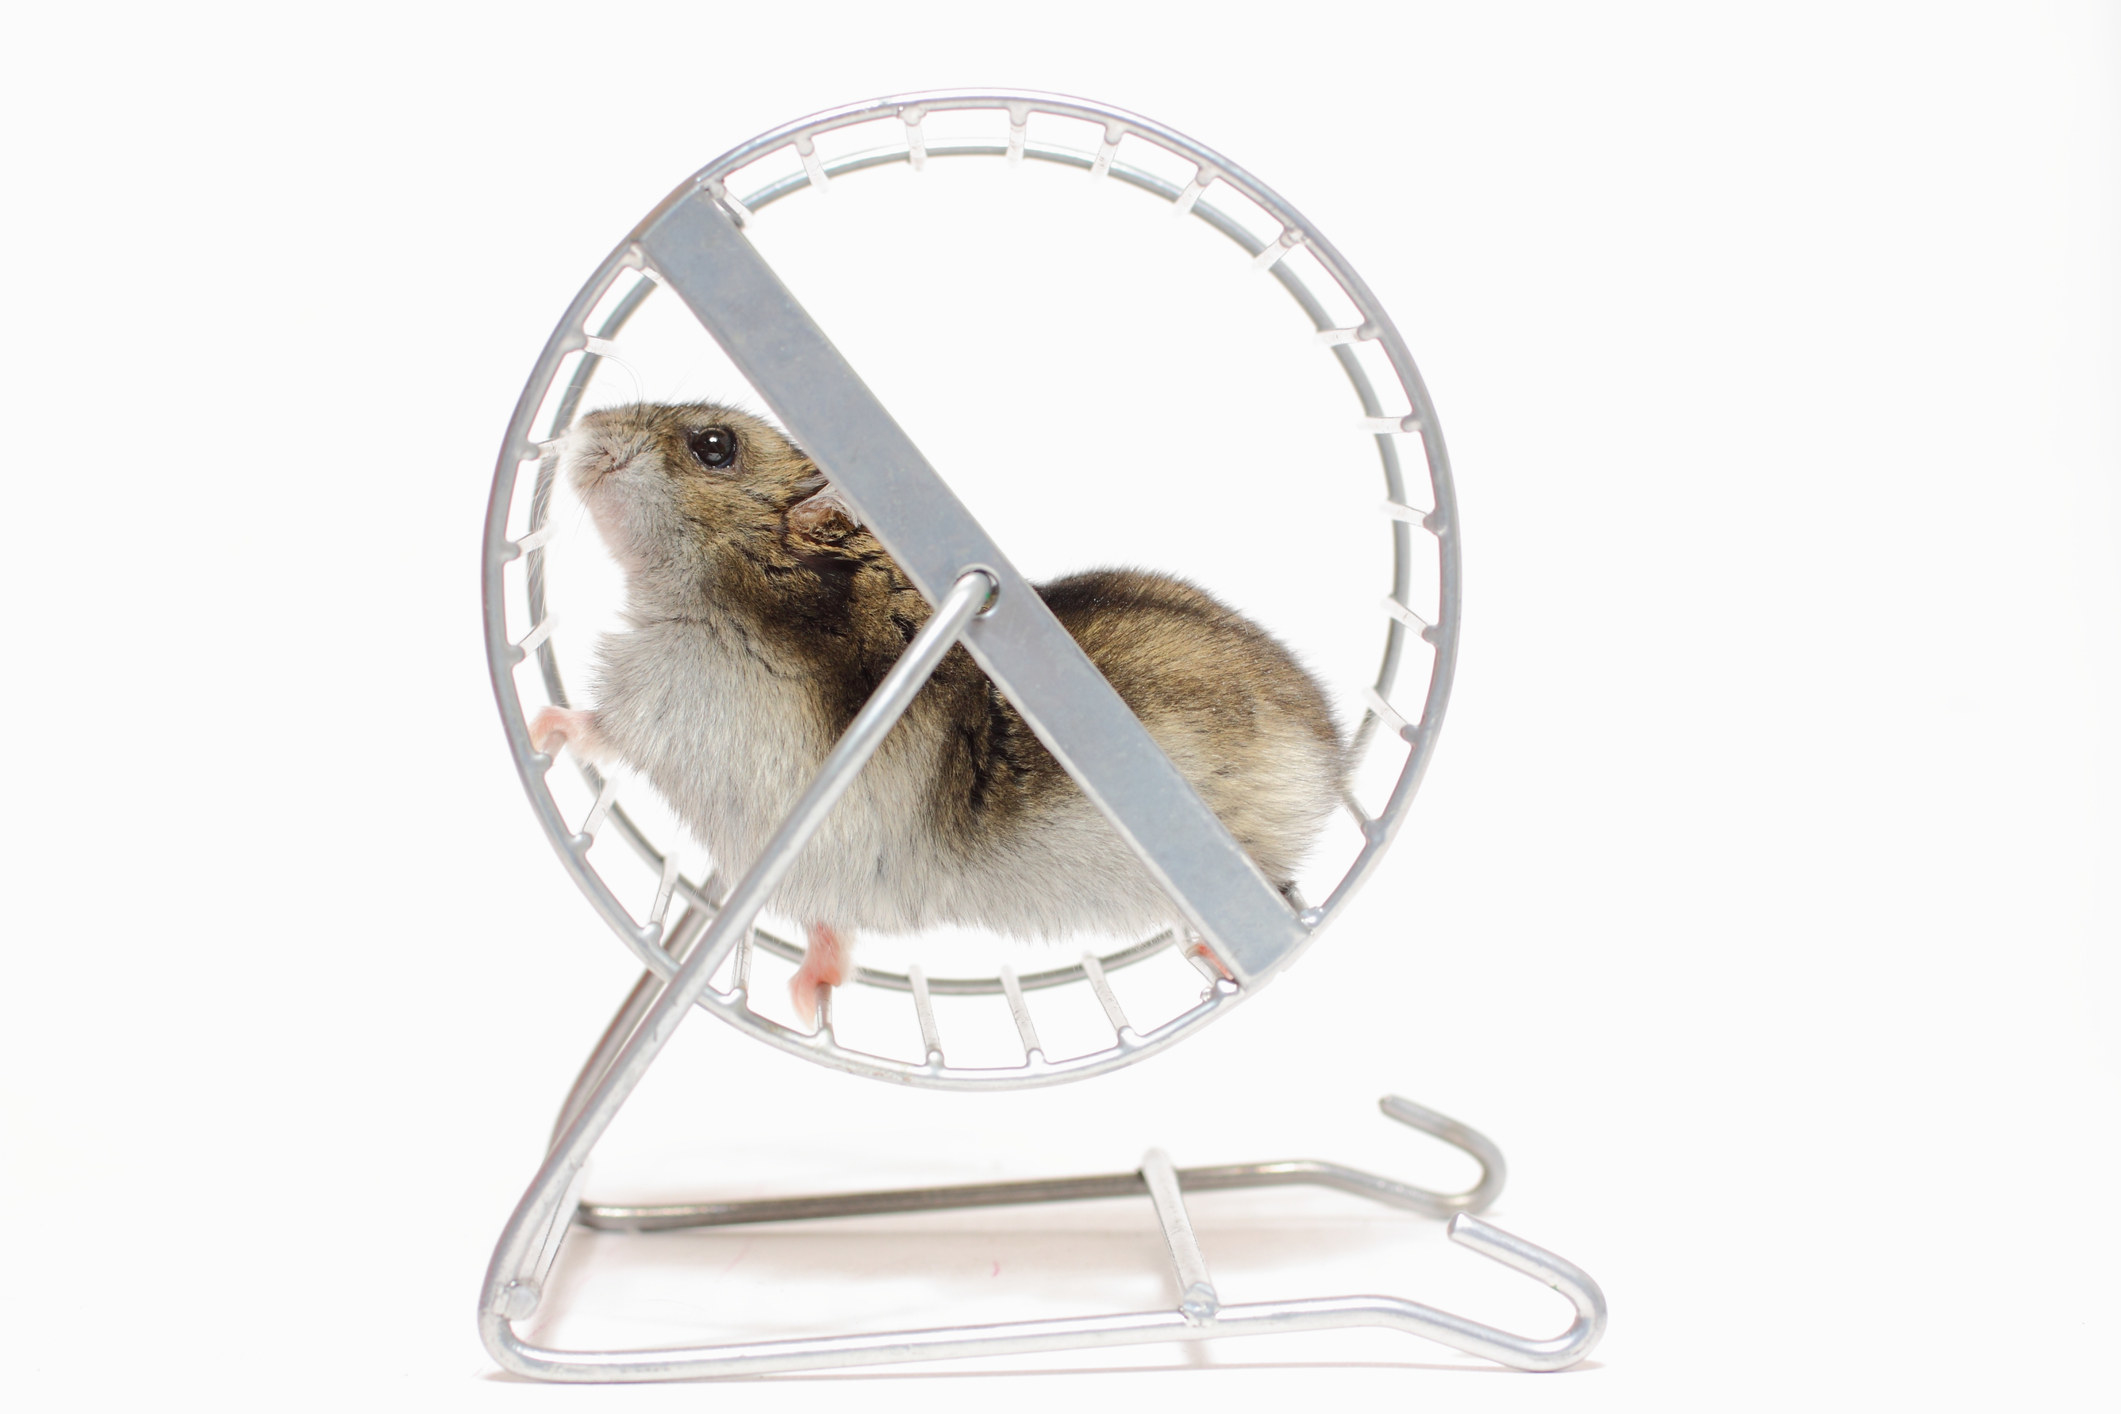 A small white and brown hamster in a wheel